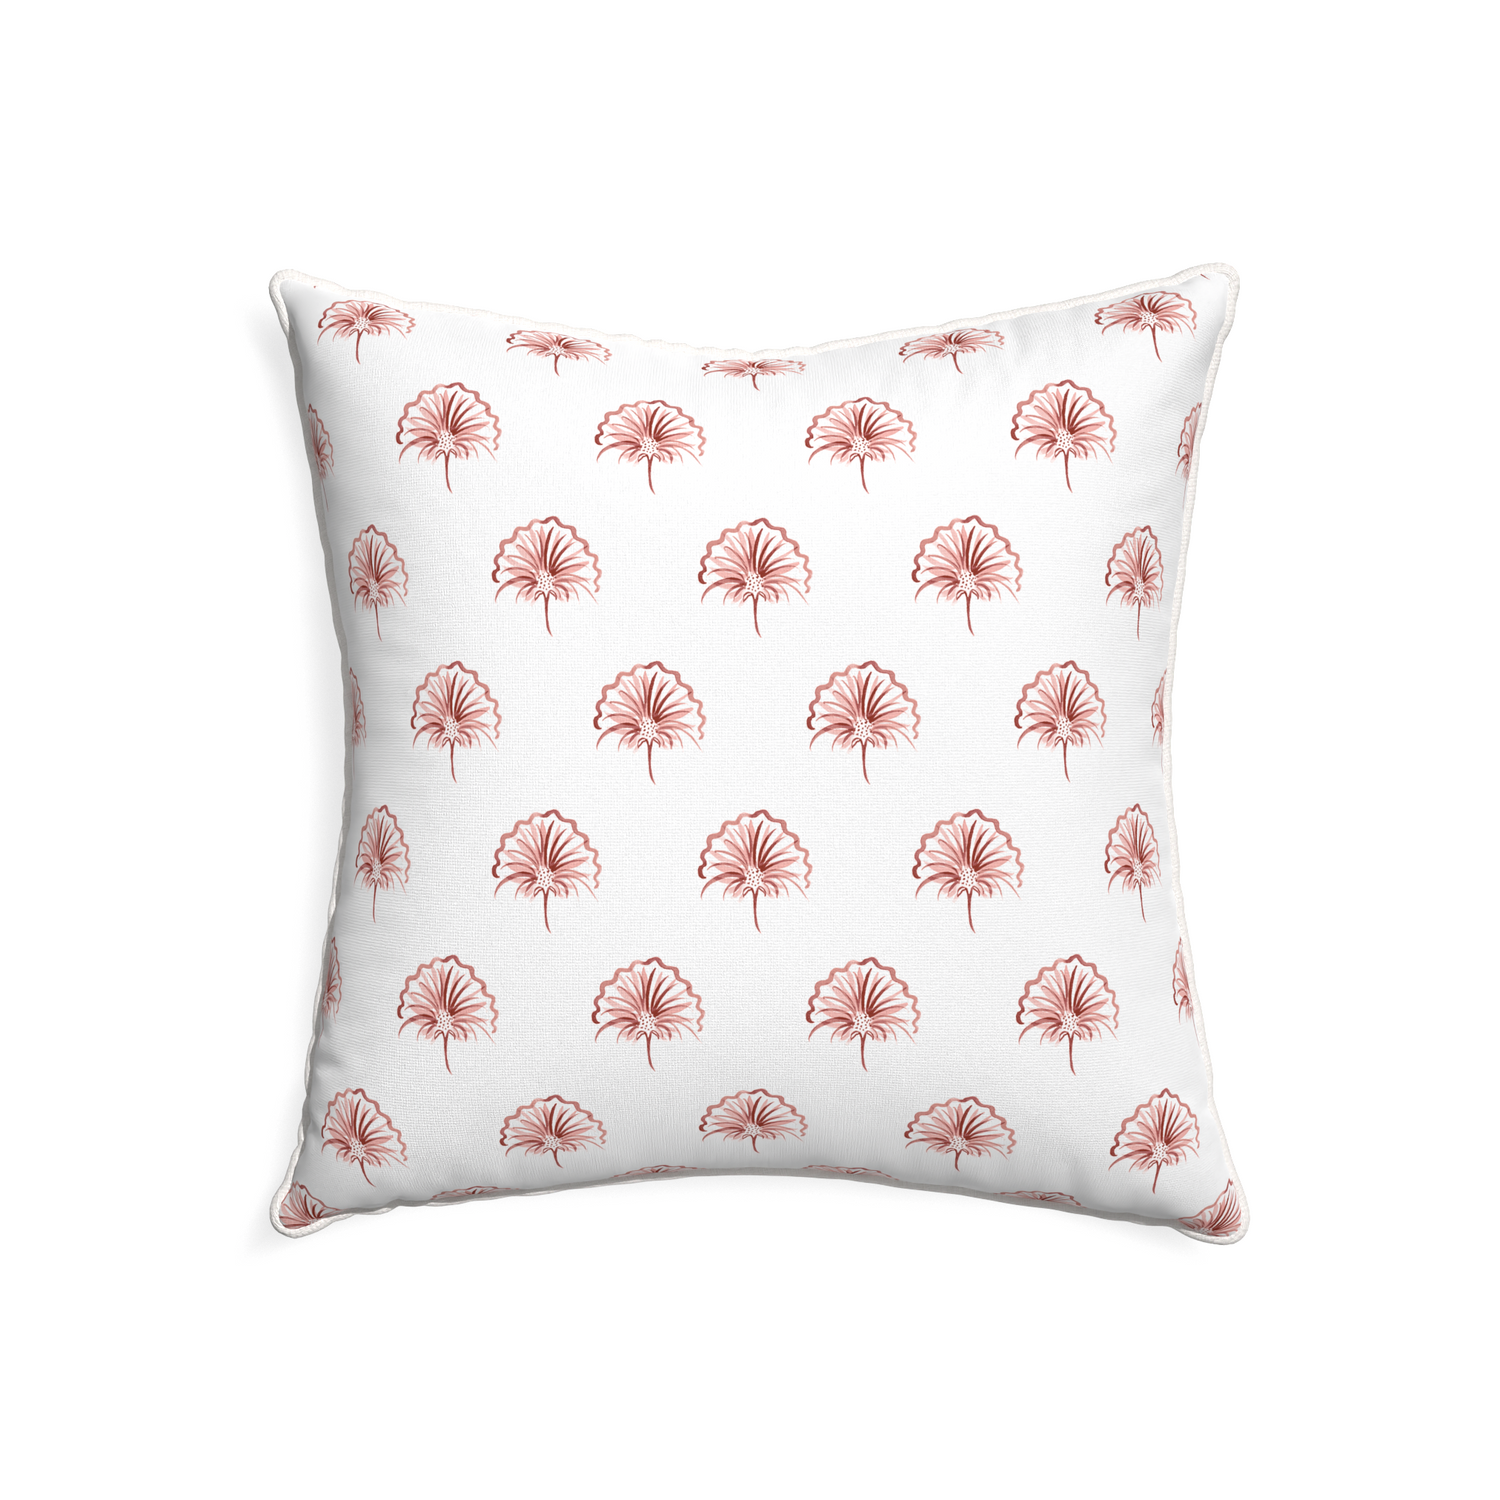 22-square penelope rose custom pillow with snow piping on white background